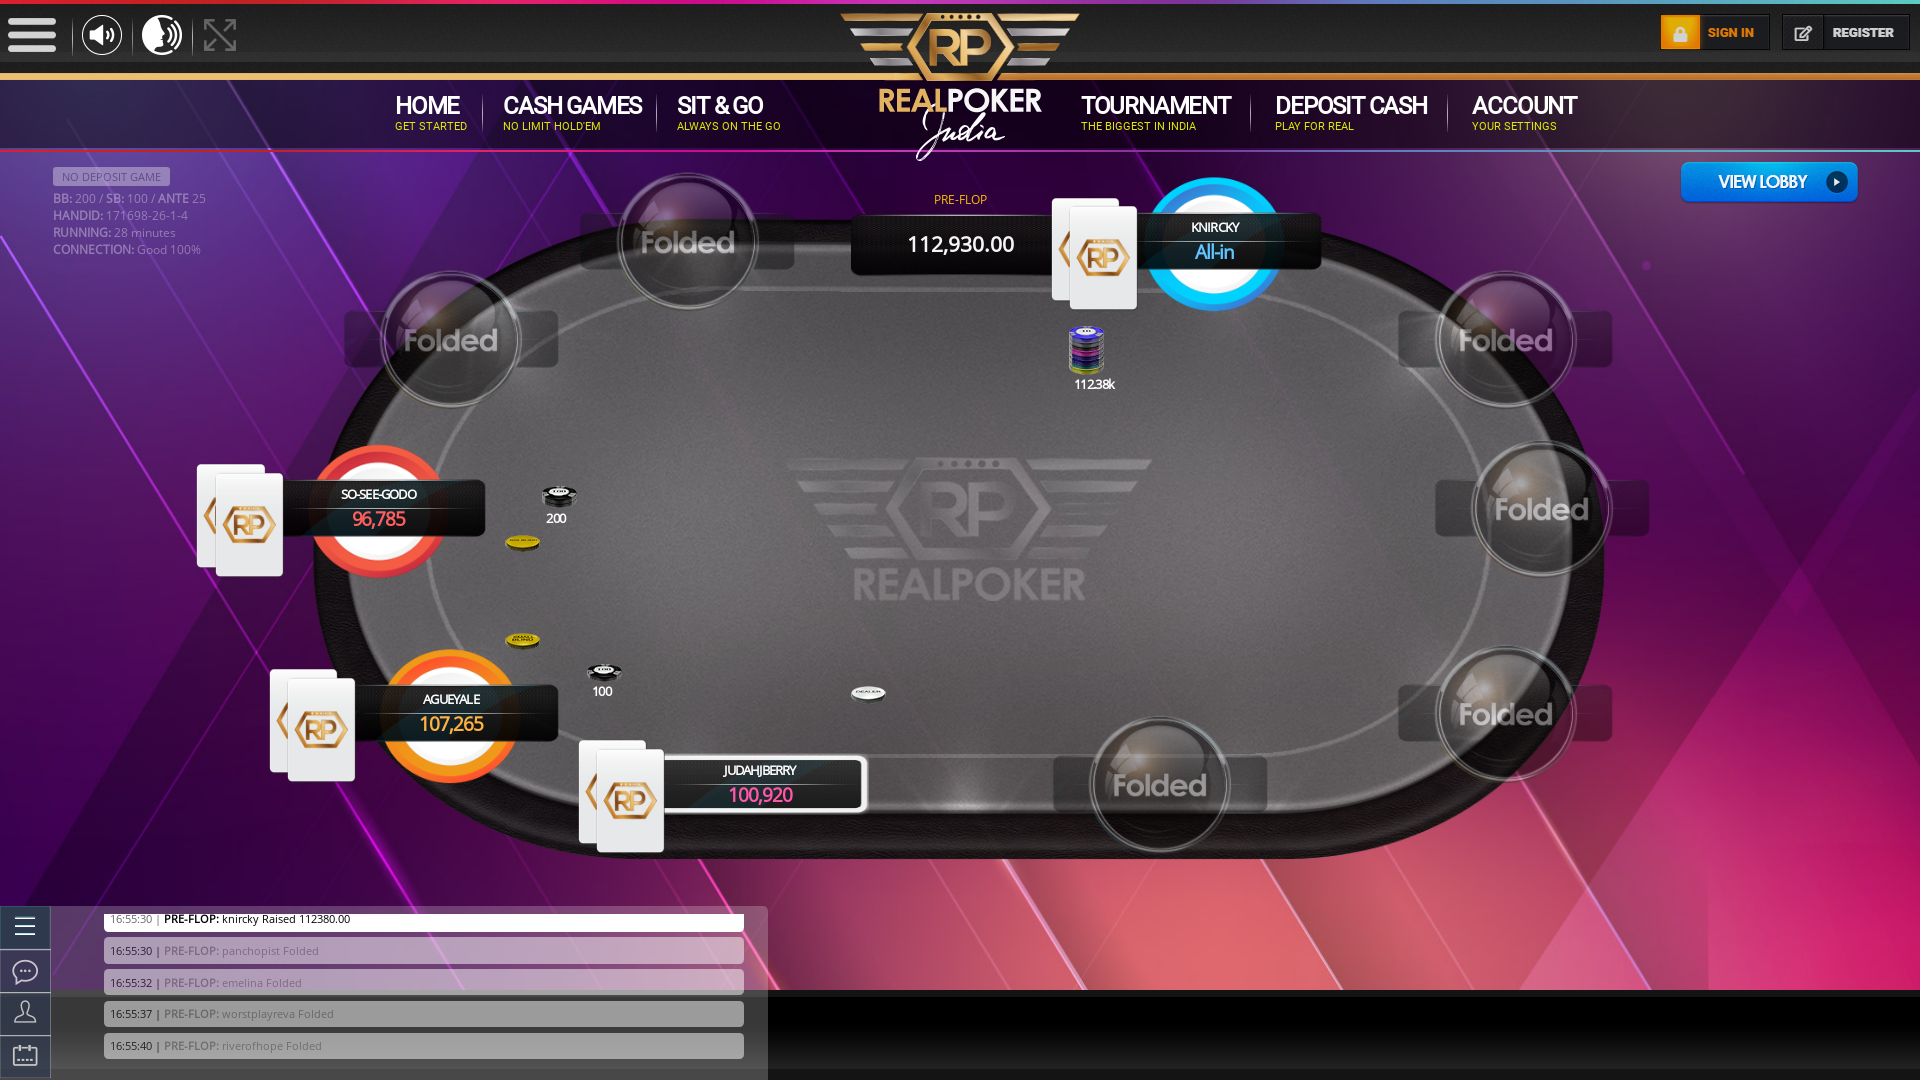 10 player texas holdem table at real poker with the table id 171698